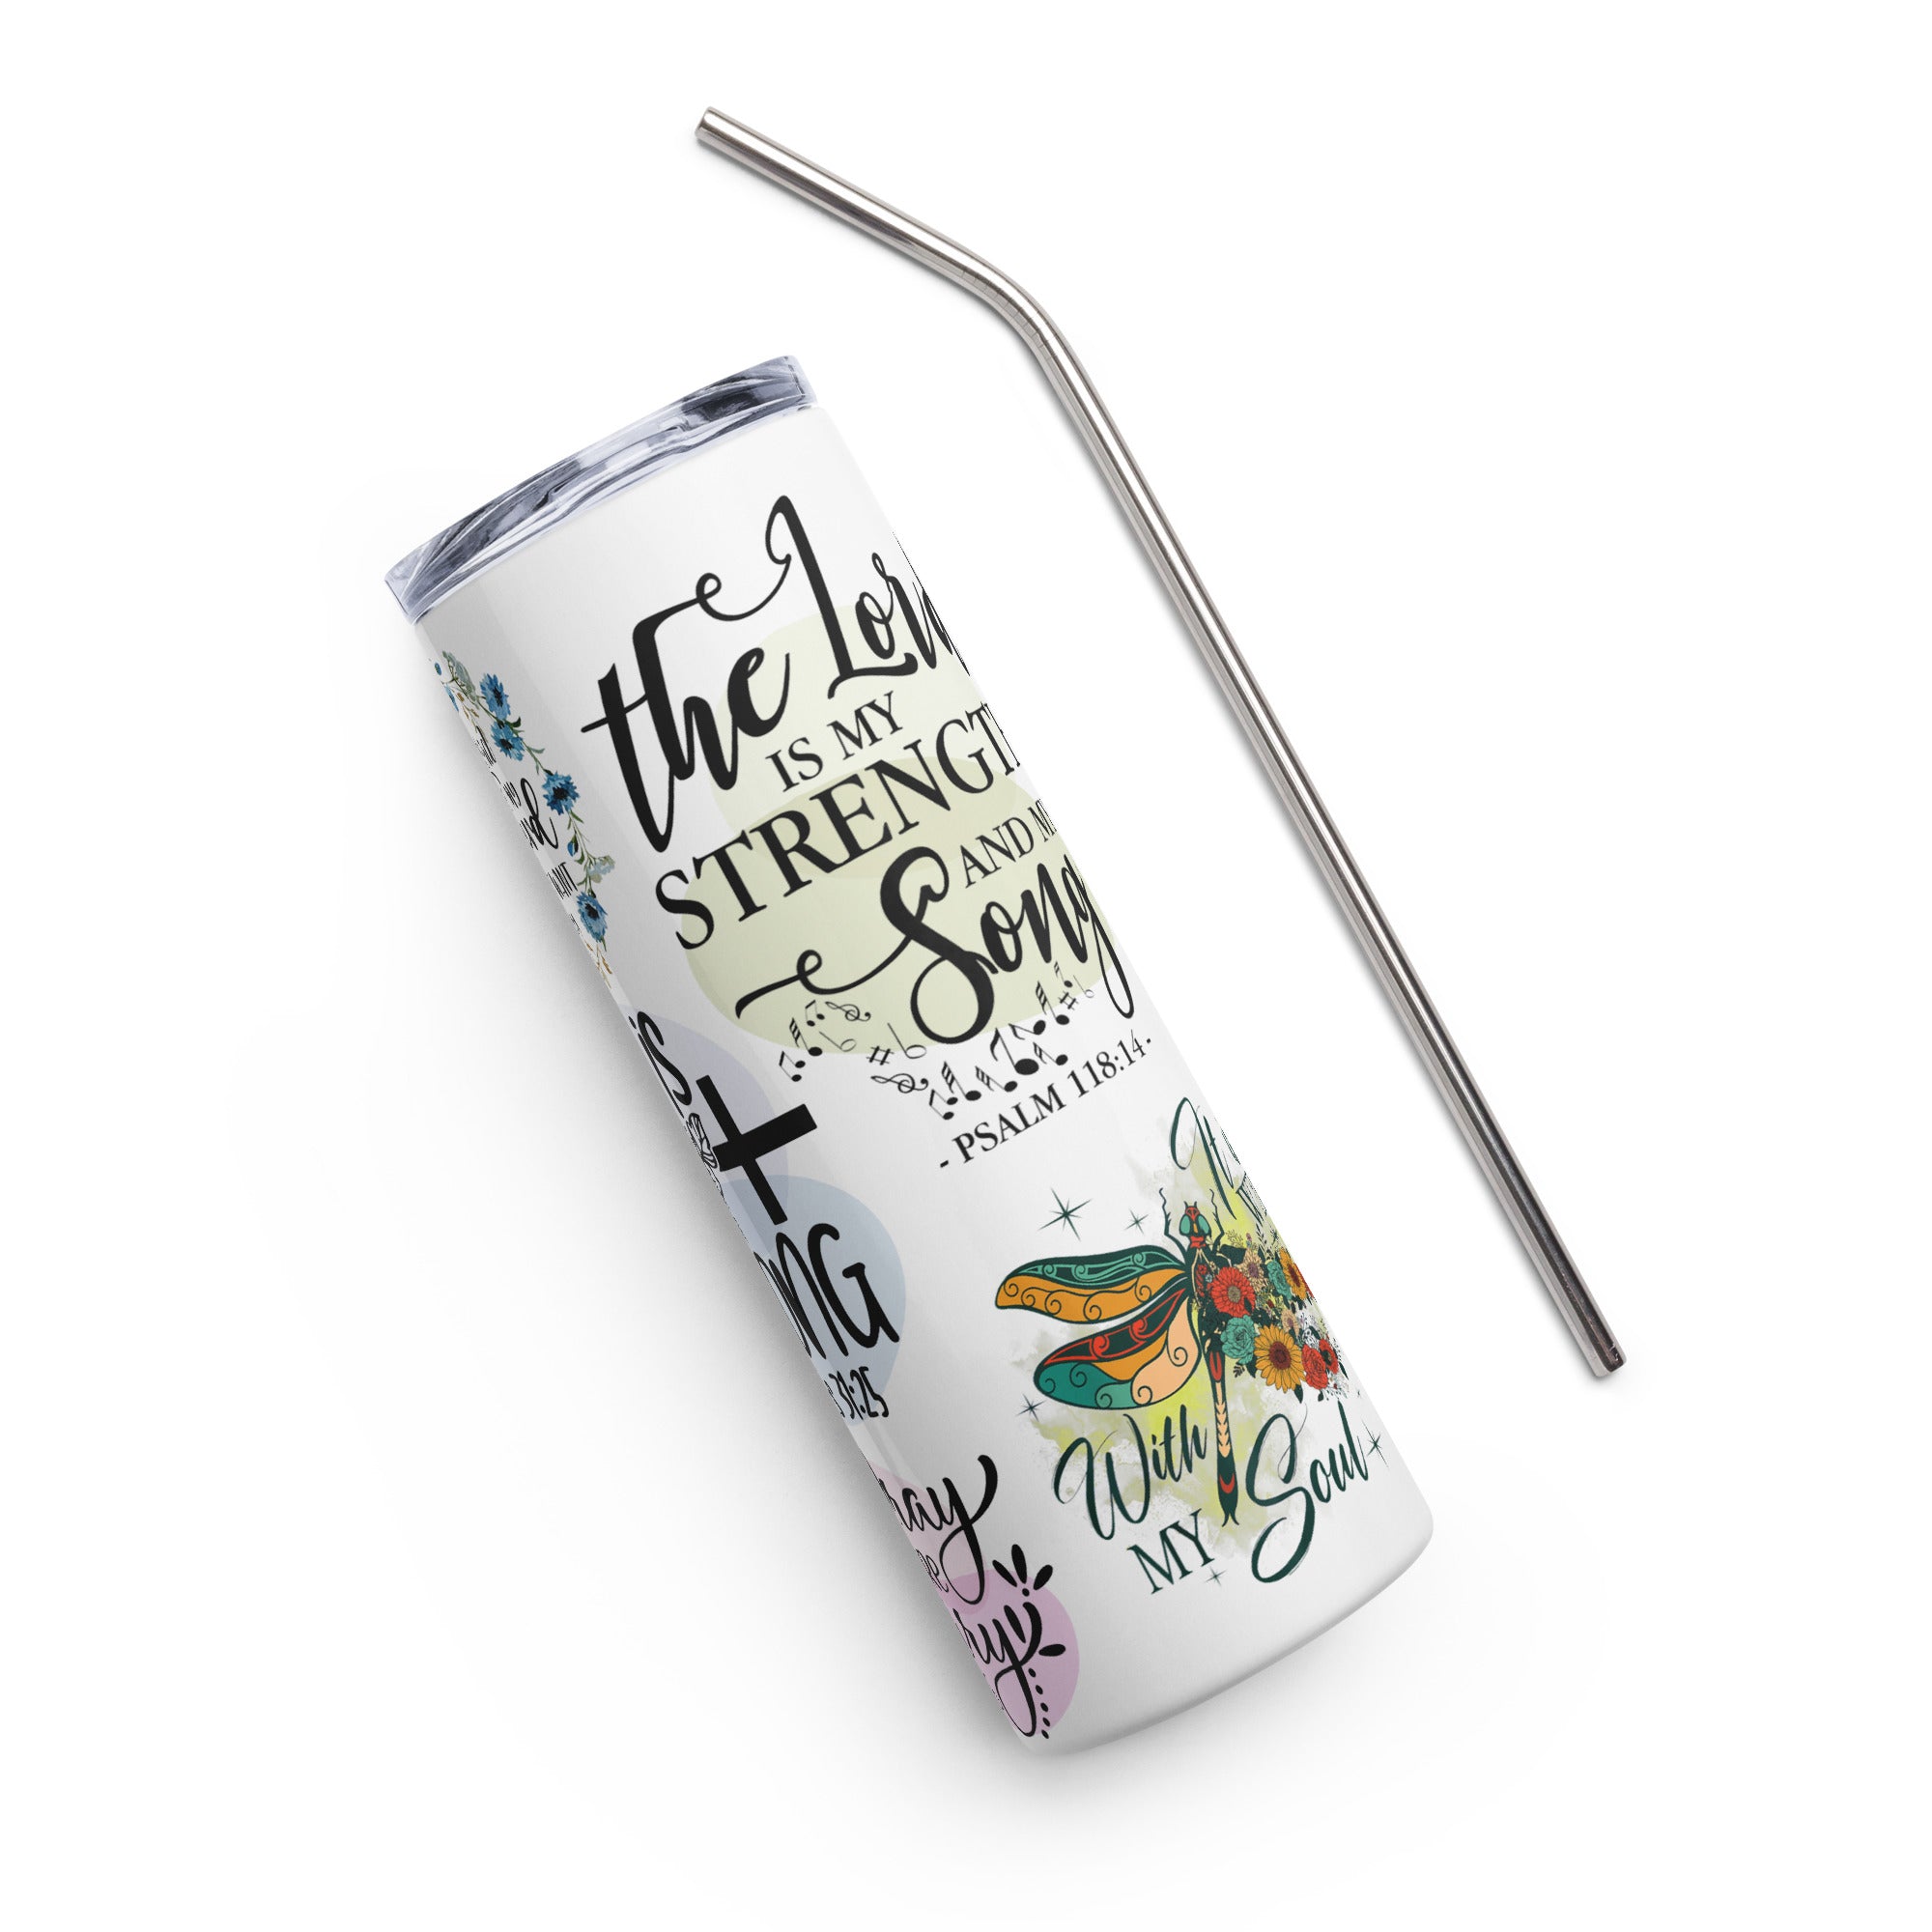 Strong in Christ 20 oz Tumbler with reusable Stainless Steel Straw Size: 20oz Color: White Jesus Passion Apparel